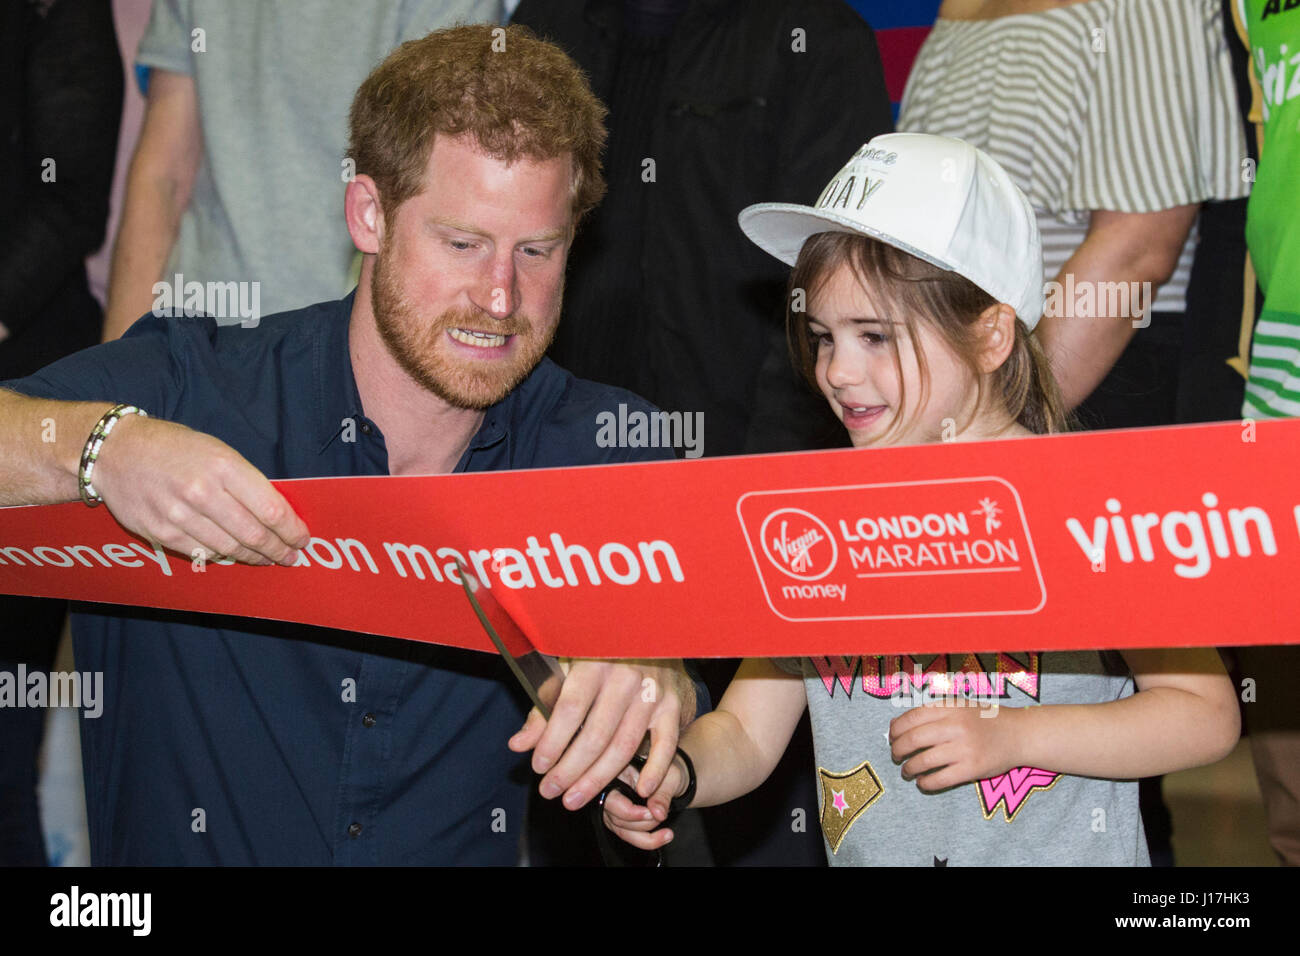 London, UK. 19th Apr, 2017. Prince Harry enlists the help of Melissa Howse, 5, to cut the ribbon. Prince Harry opens the 2017 Virgin Money London Marathon Expo at ExCeL London where thousands of runners will register over the following four days for this Sunday's 37th edition of the race. Prince Harry is Patron of the London Marathon Charitable Trust and, together with The Duke and Duchess of Cambridge, is spearheading the Heads Together campaign to end the stigma around mental health and start a national conversation on mental wellbeing for everyone. Credit: Vibrant Pictures/Alamy Live News Stock Photo